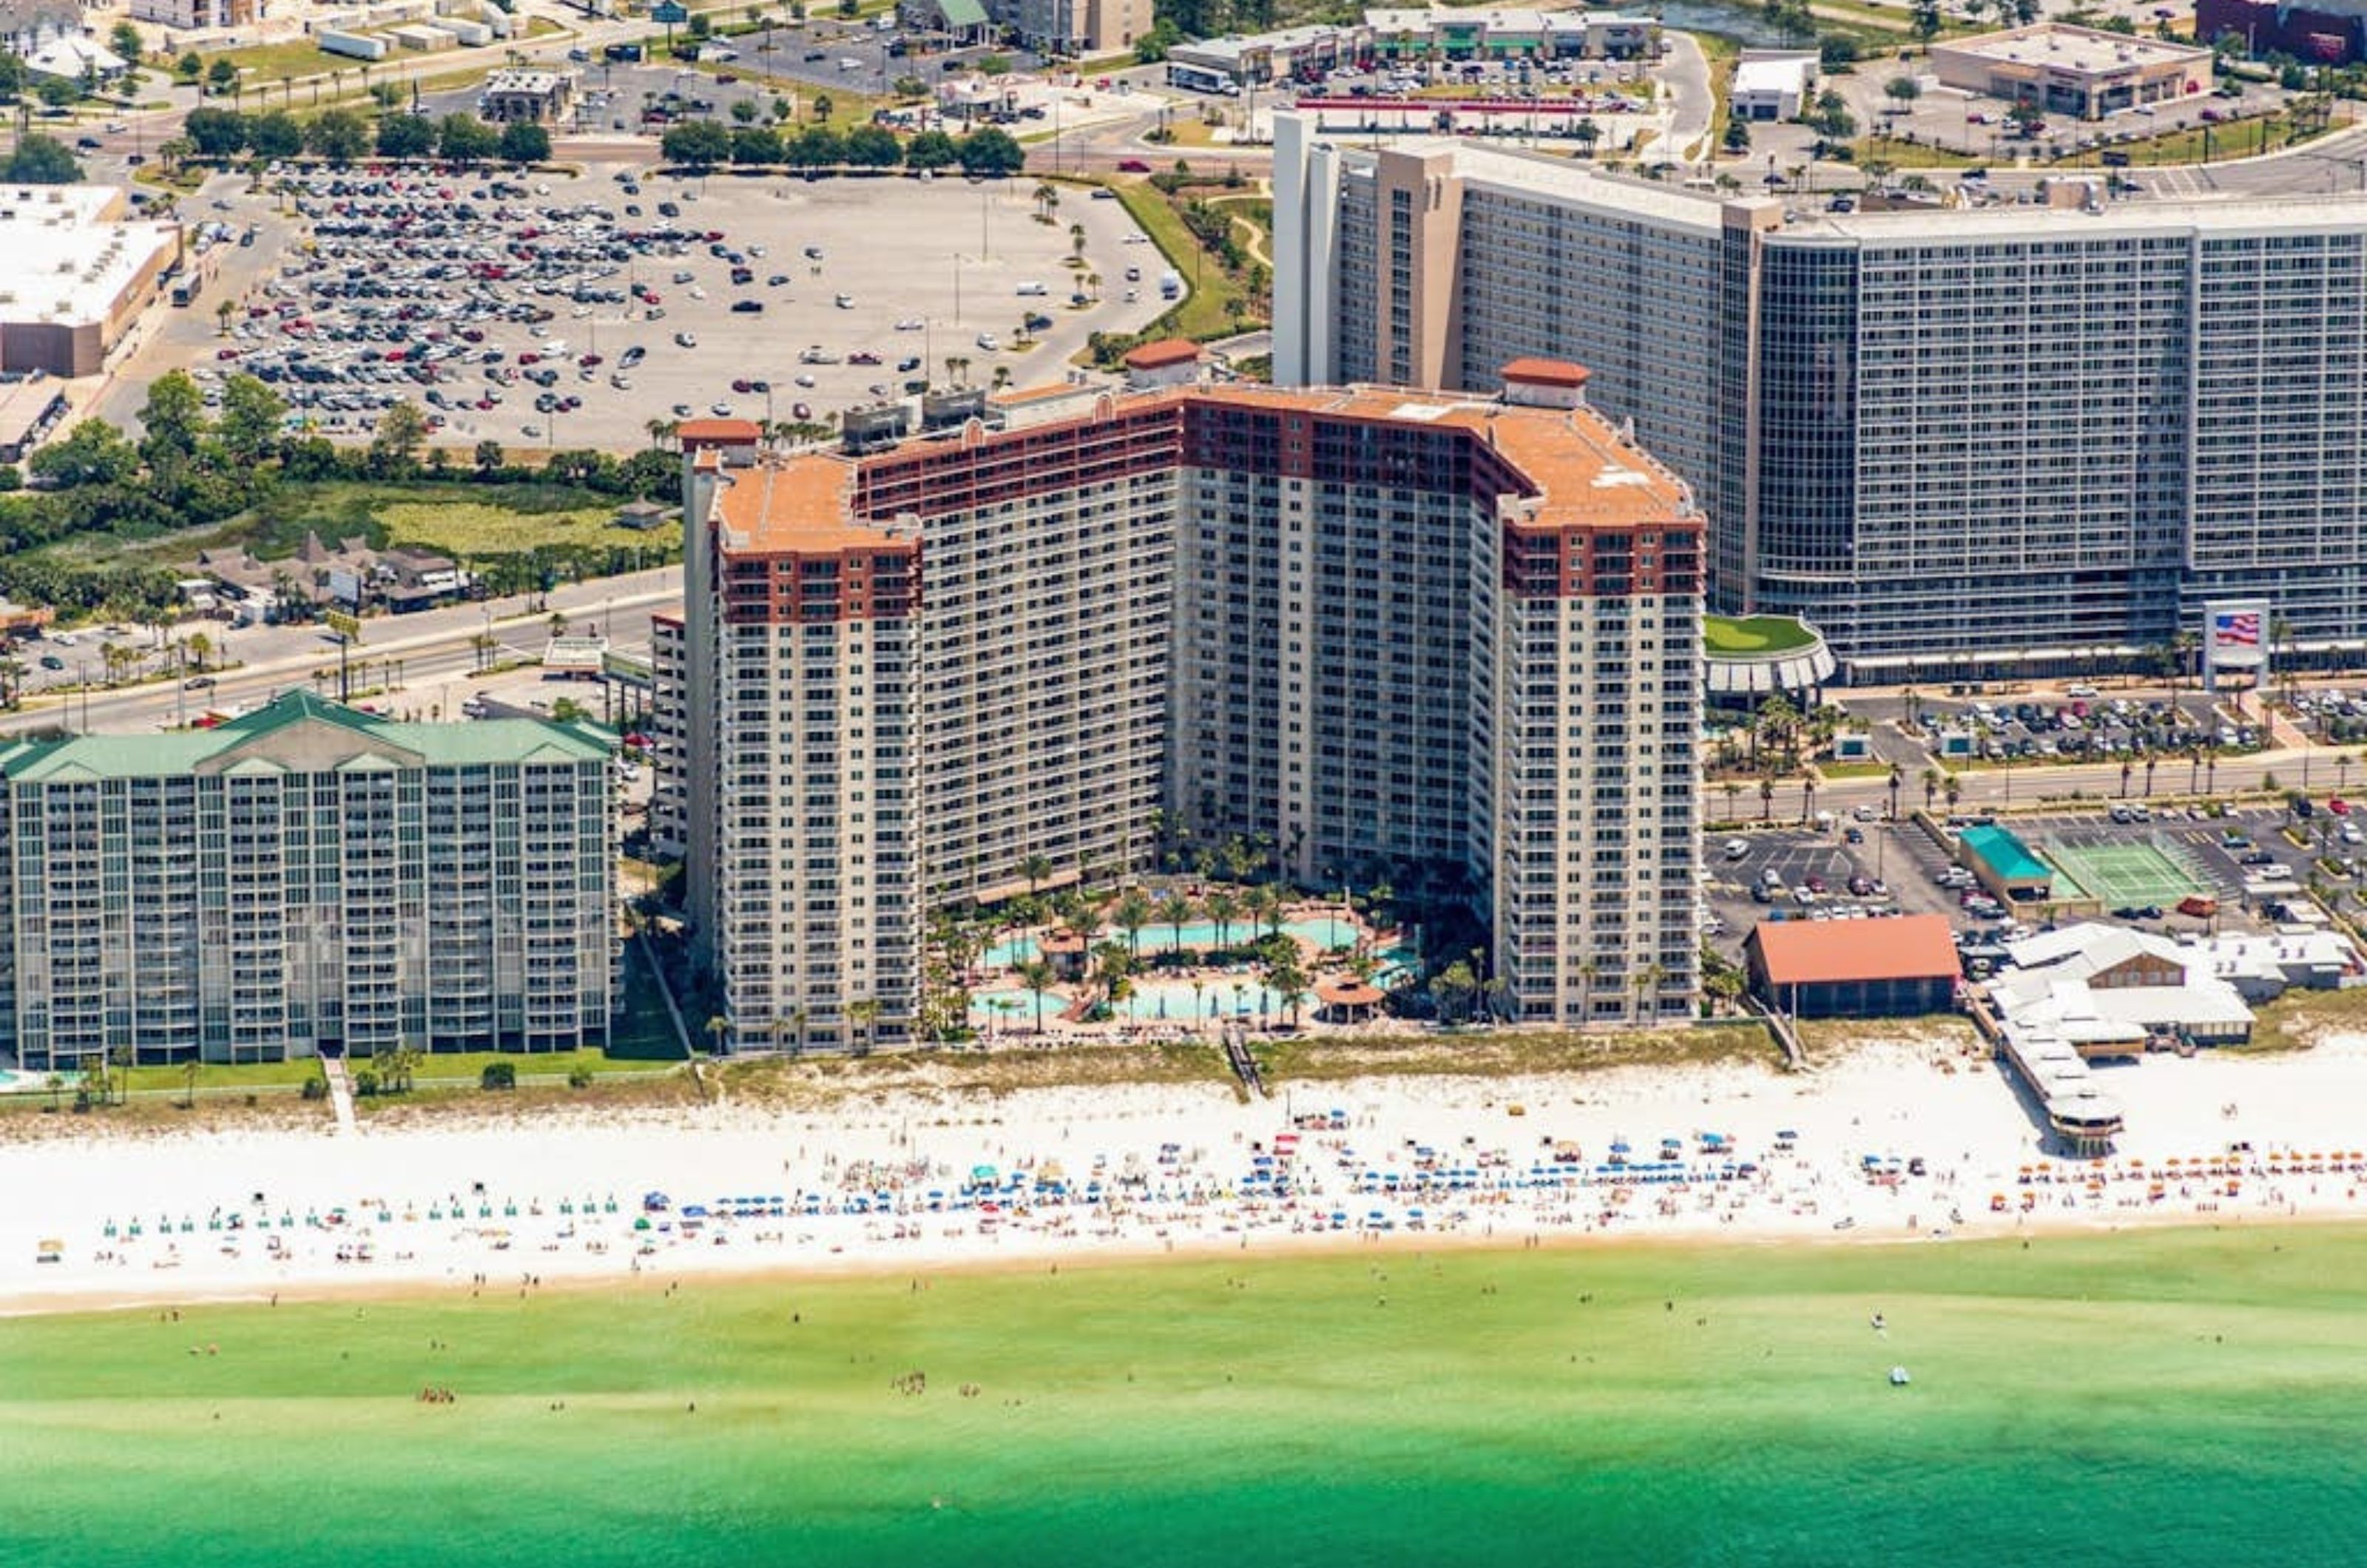 Birds eye view of the Shores of Panama on the beach in Panama City Beach Florida 